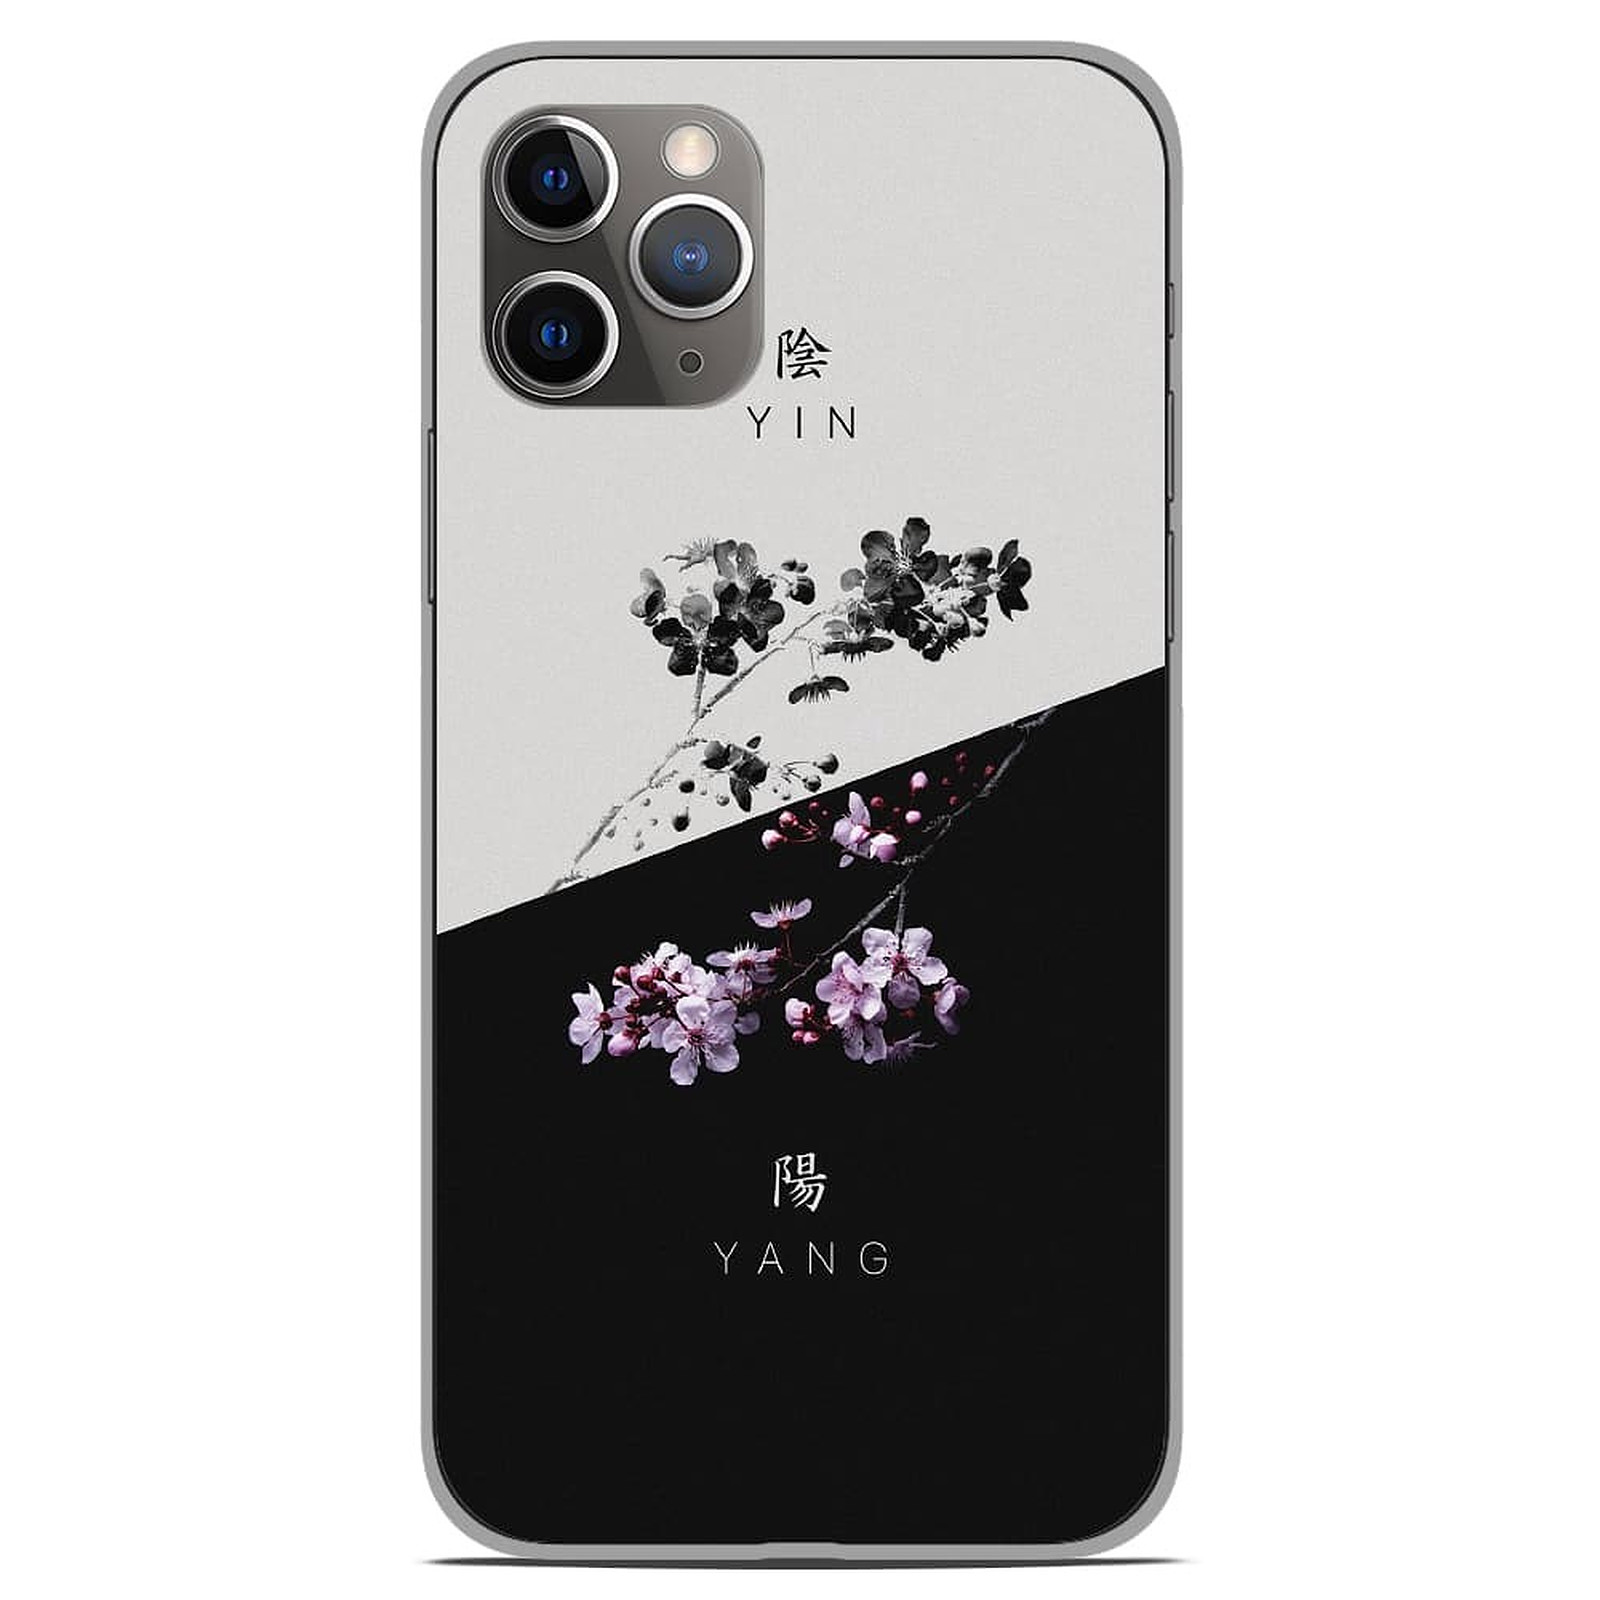 1001 Coques Coque silicone gel Apple iPhone 11 Pro motif Yin et Yang - Coque telephone 1001Coques